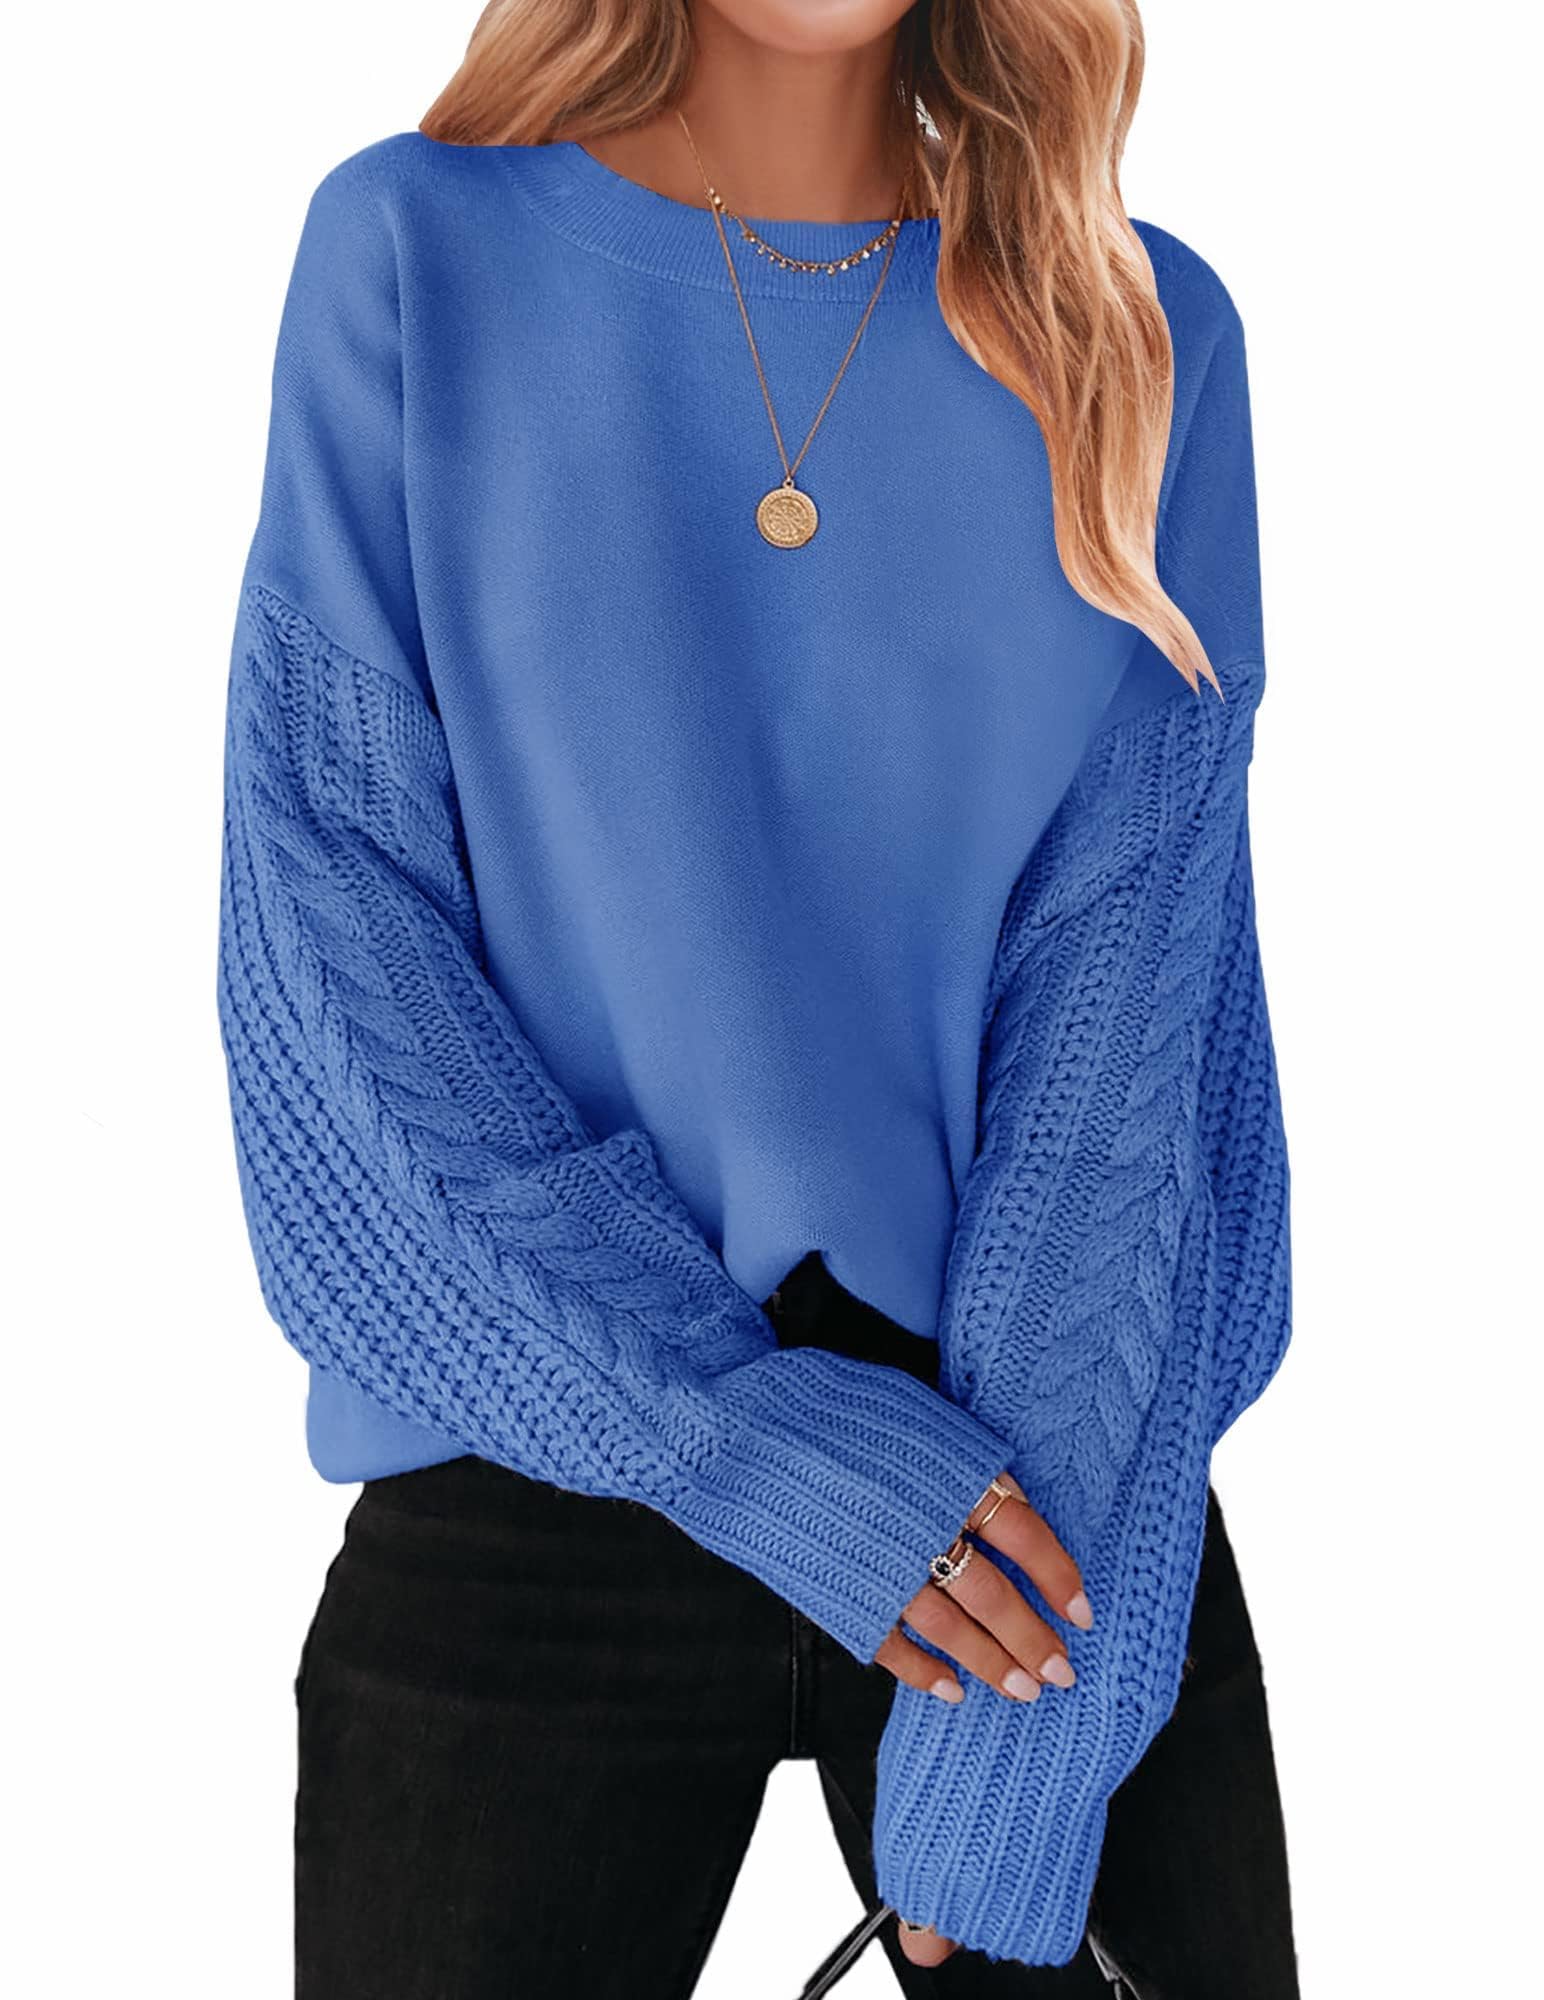 ZESICA Women's 2023 Fall Long Sleeve Crew Neck Solid Color Cable Knit Chunky Casual Oversized Pullover Sweater Tops,RoyalBlue,X-